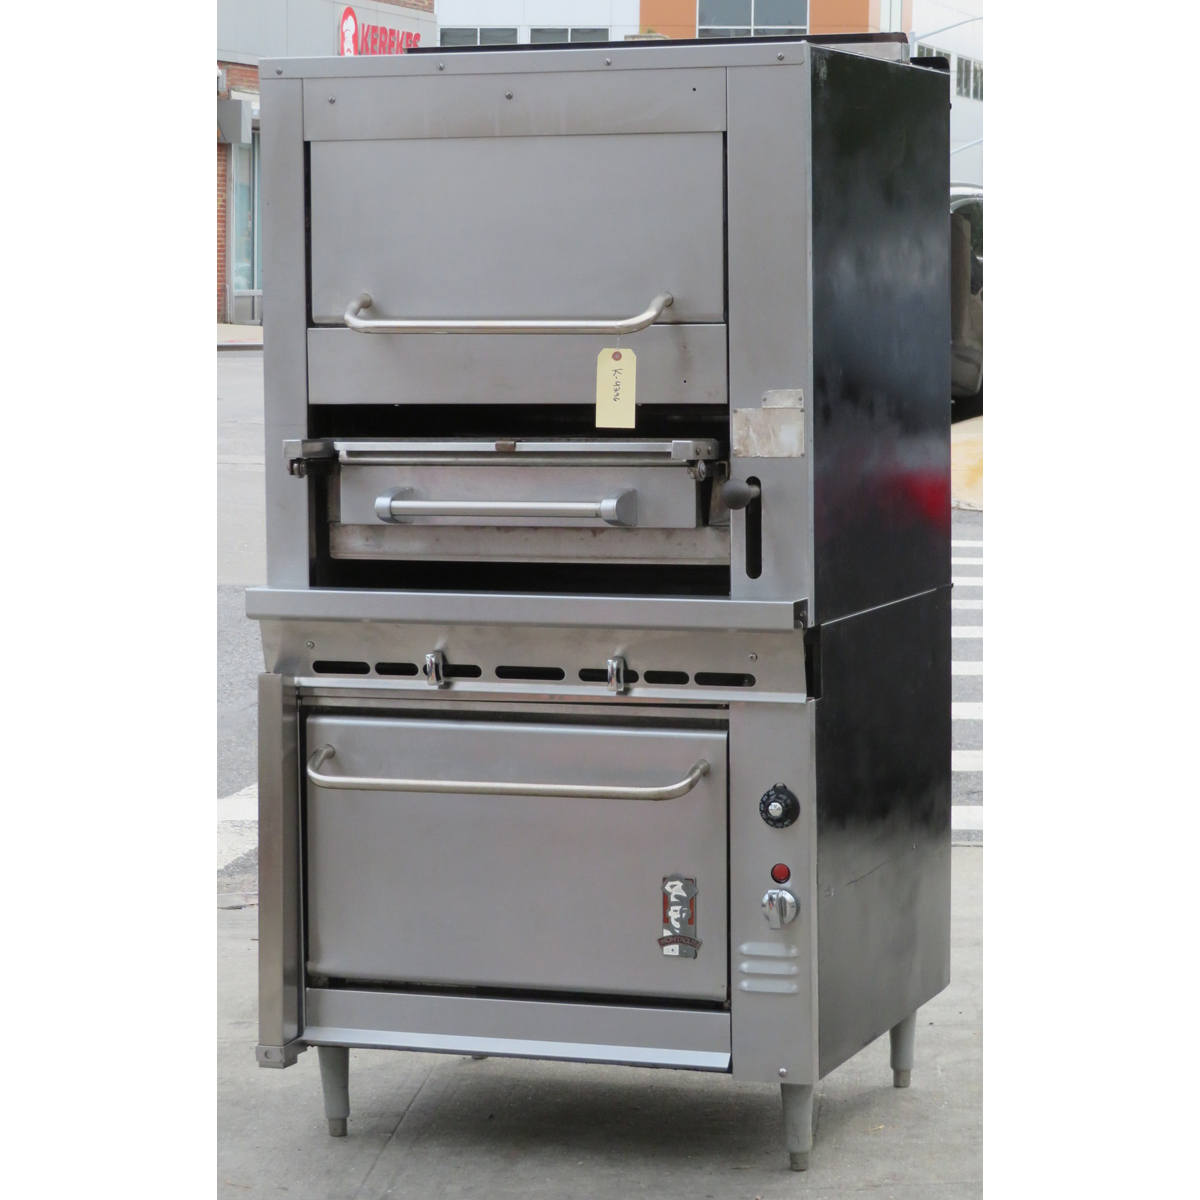 Montague 136W36 Legend Overfired Gas Broiler, Used Good Condition